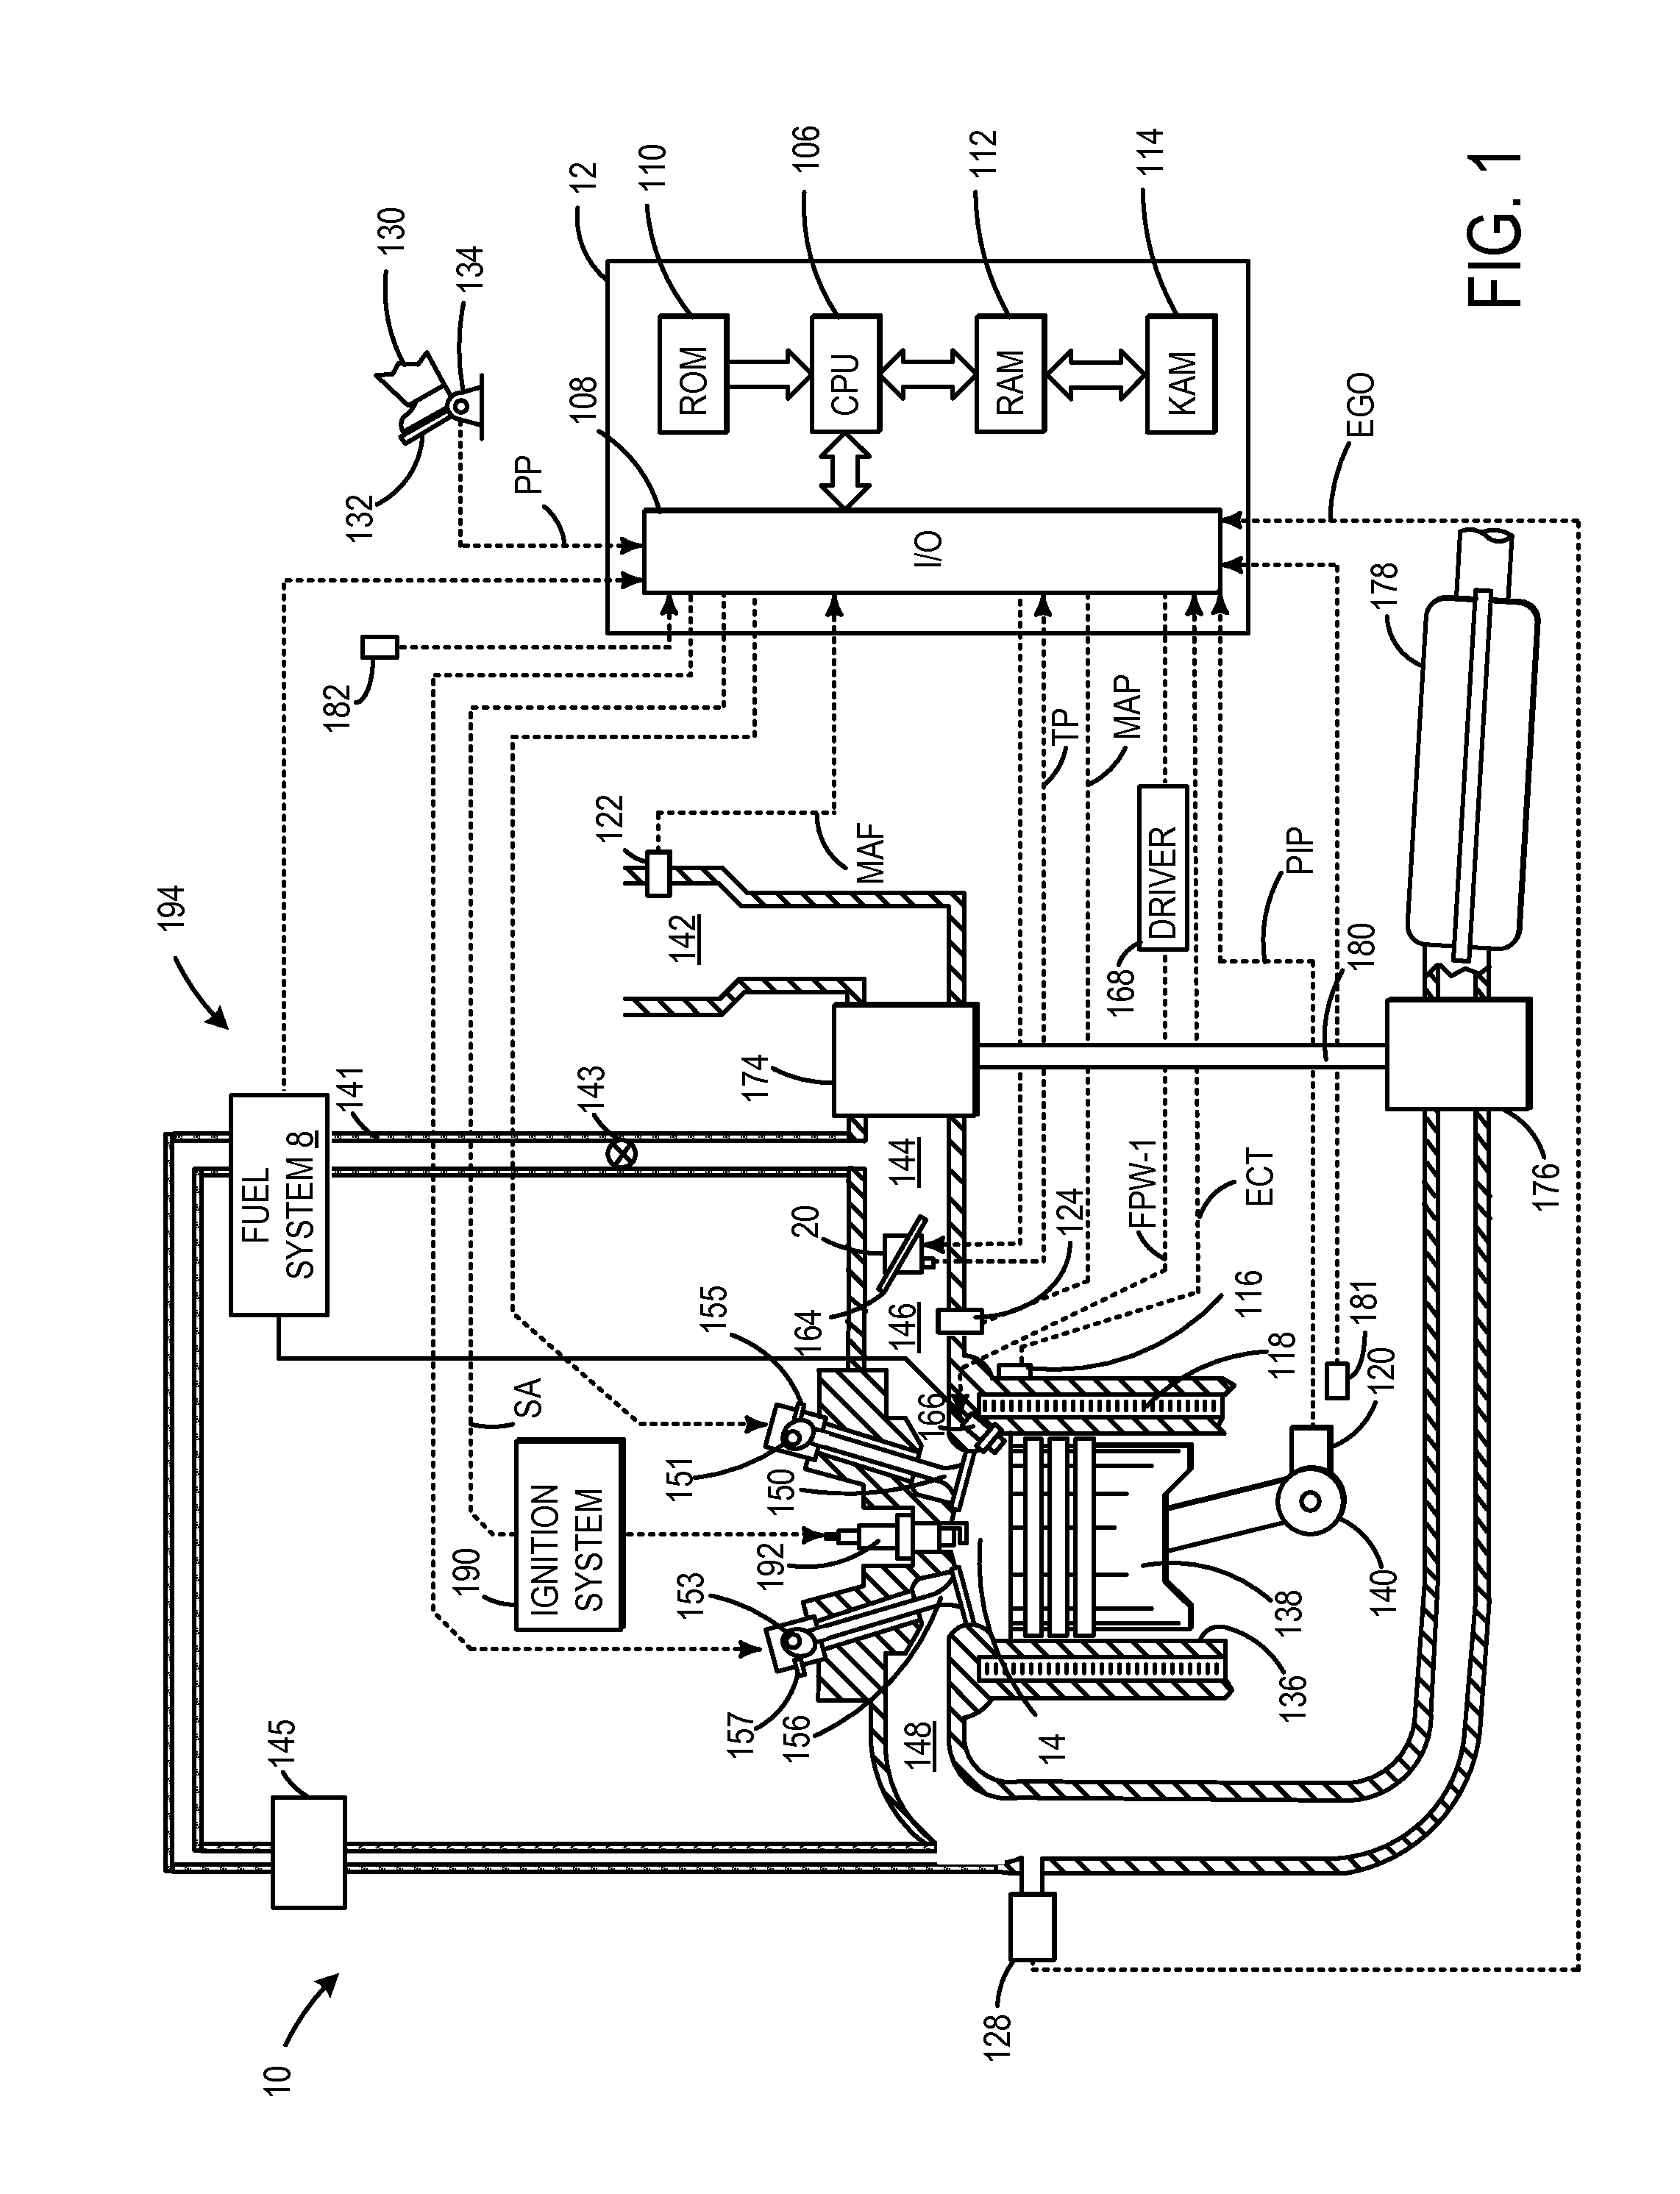 Approach for controlling exhaust gas recirculation